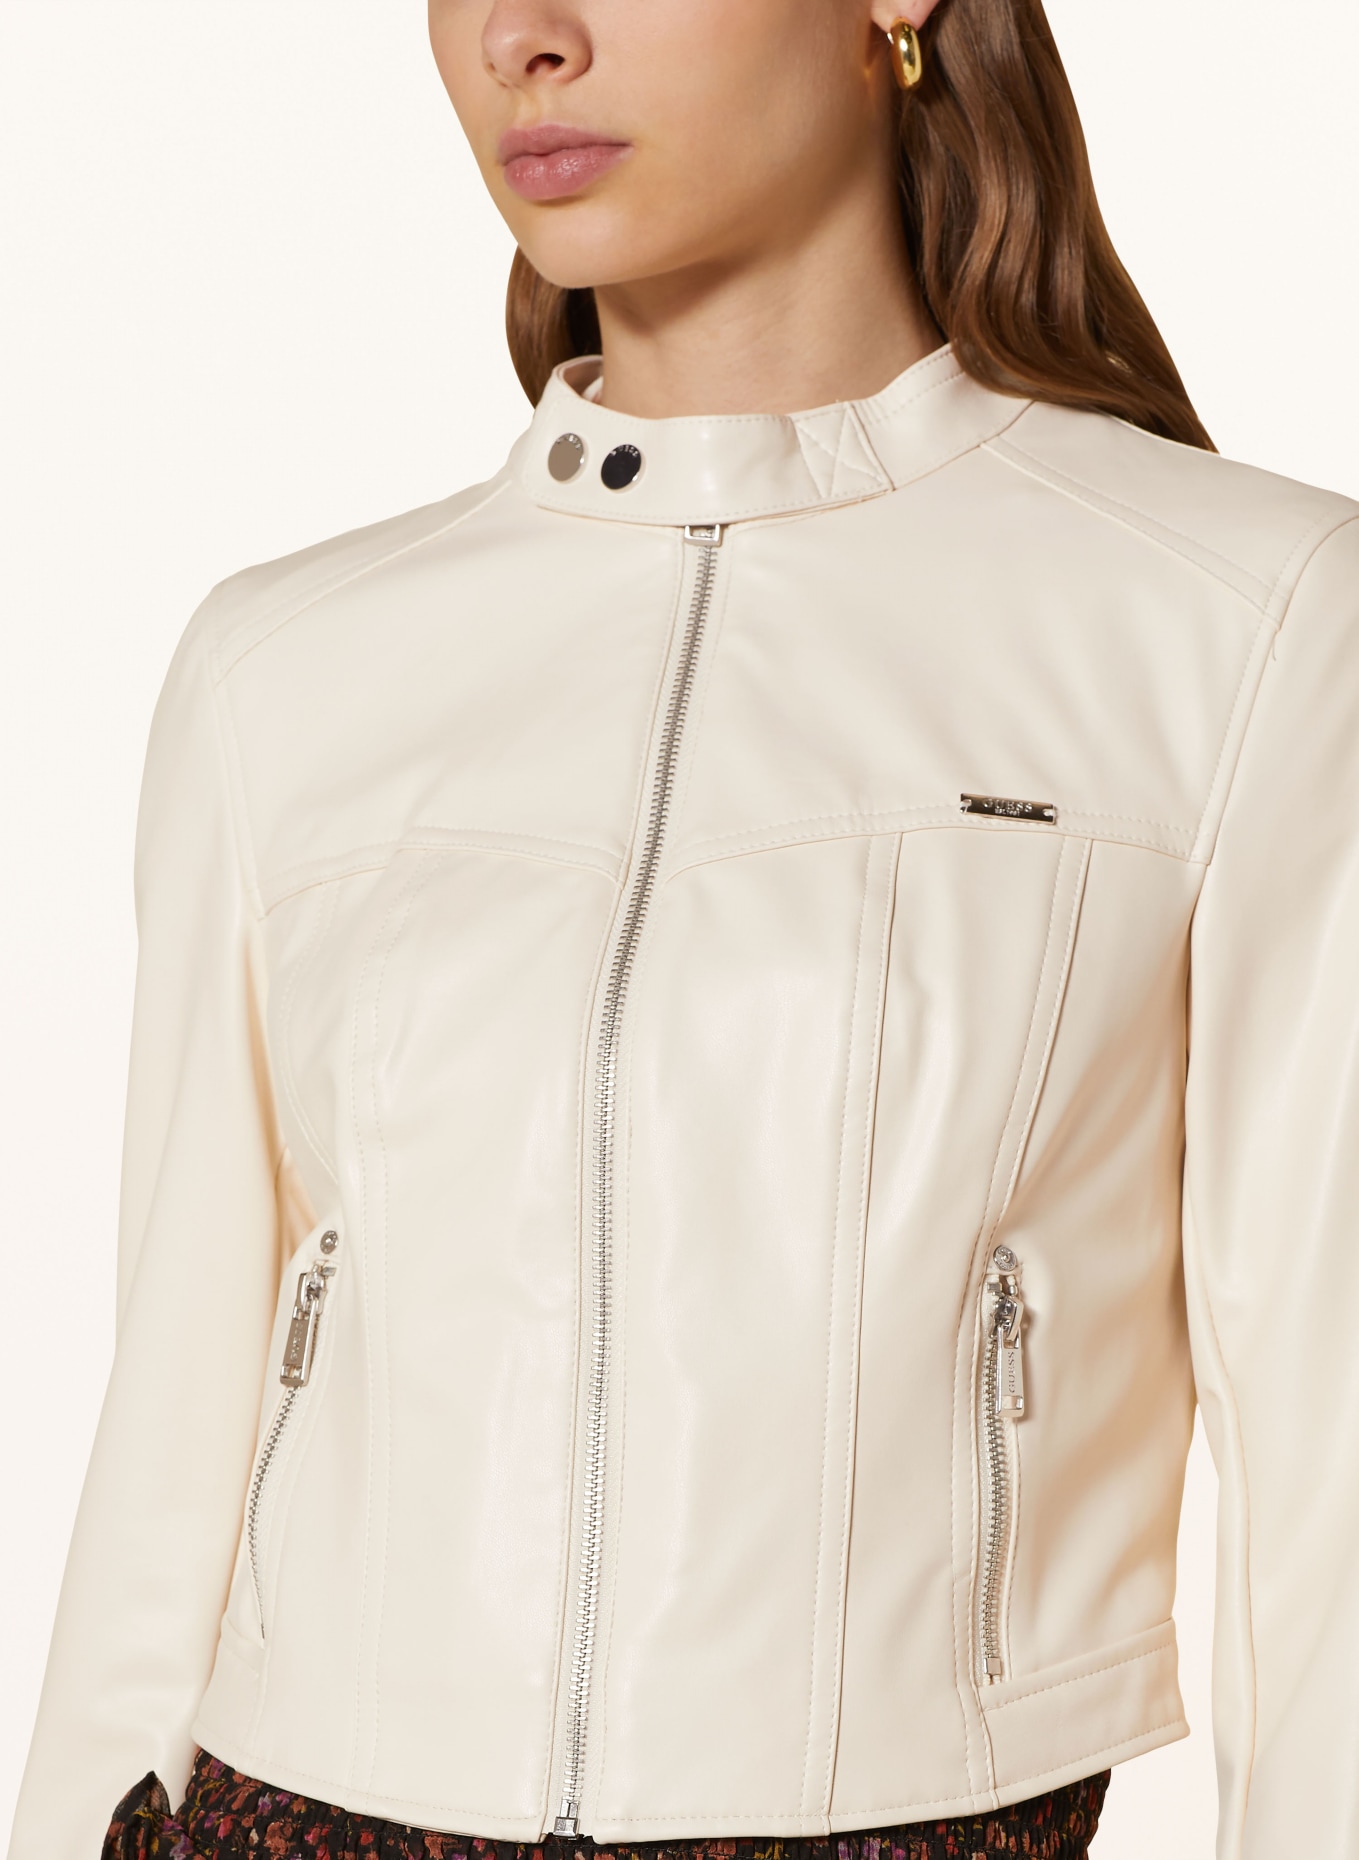 GUESS Jacket in leather look, Color: CREAM (Image 4)